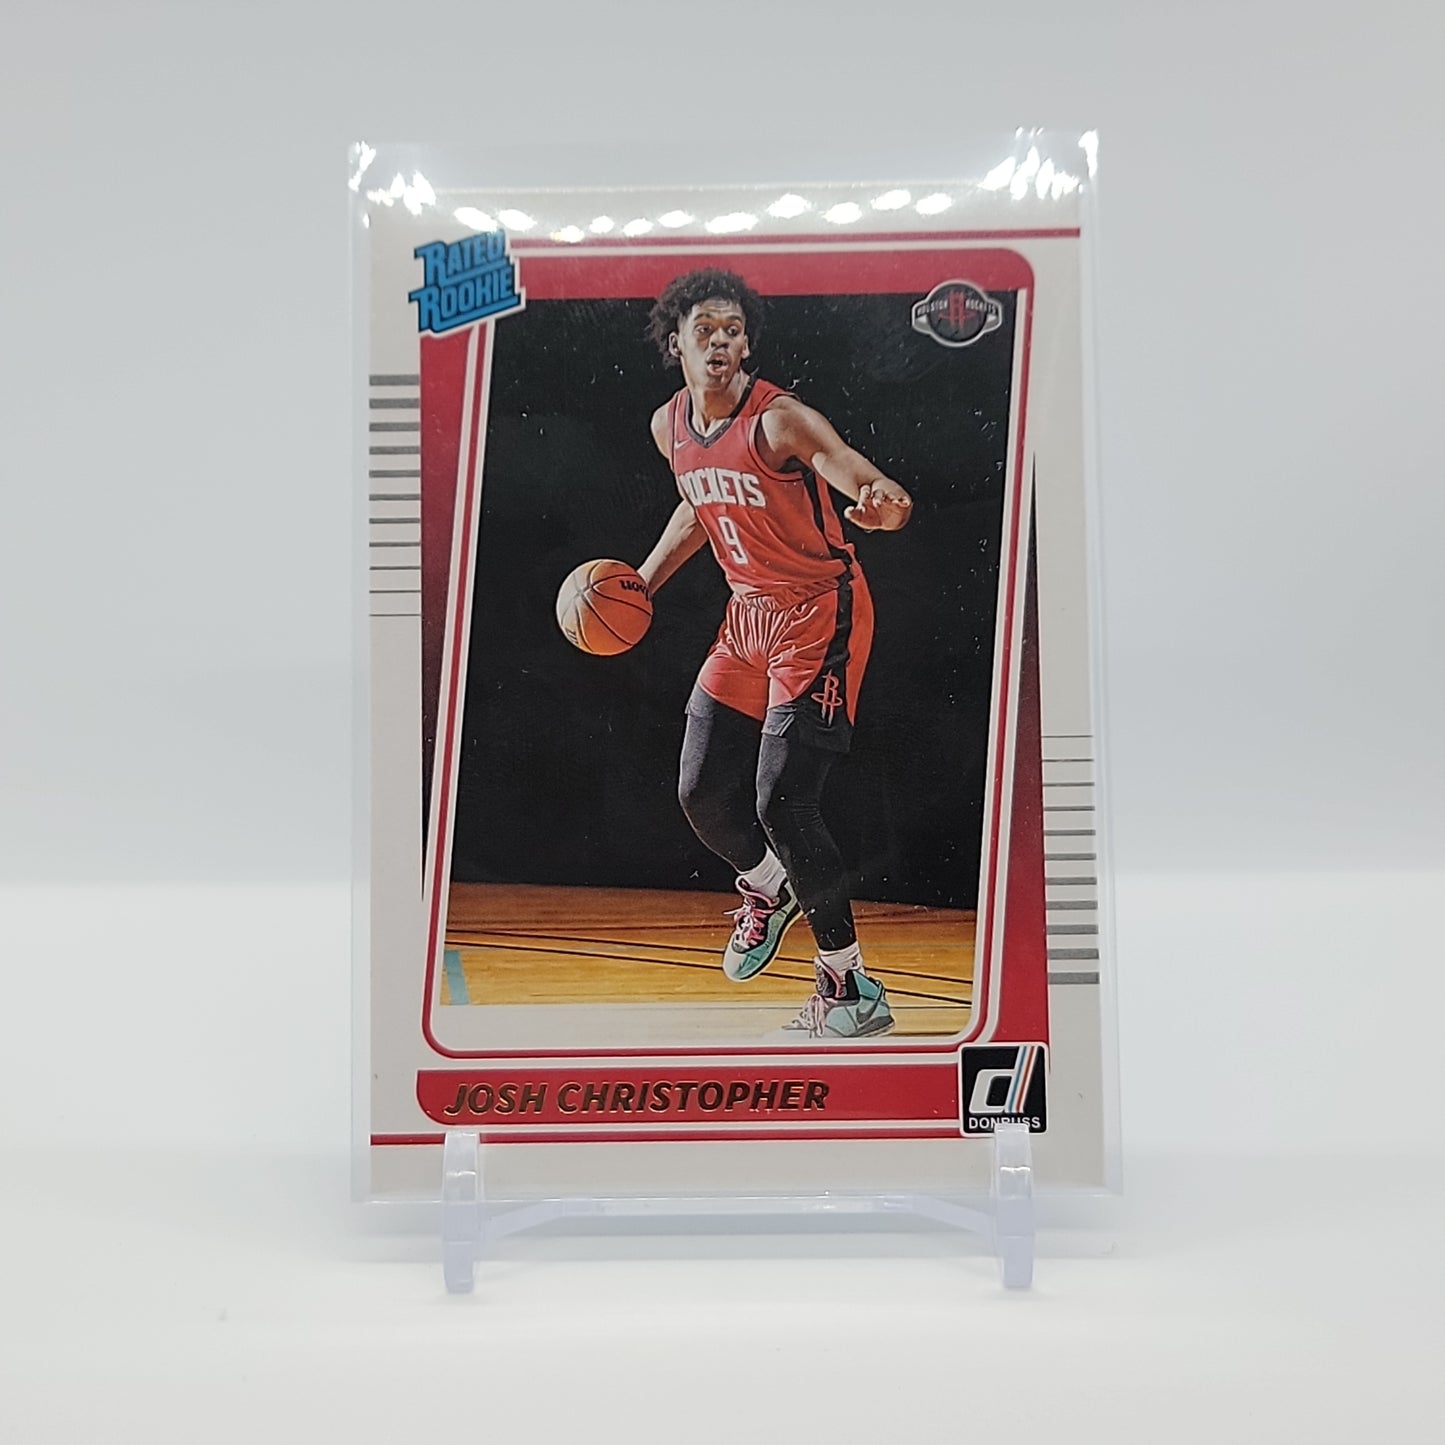 Josh Christopher Rated Rookie Donruss 2021-22 Card No. 250